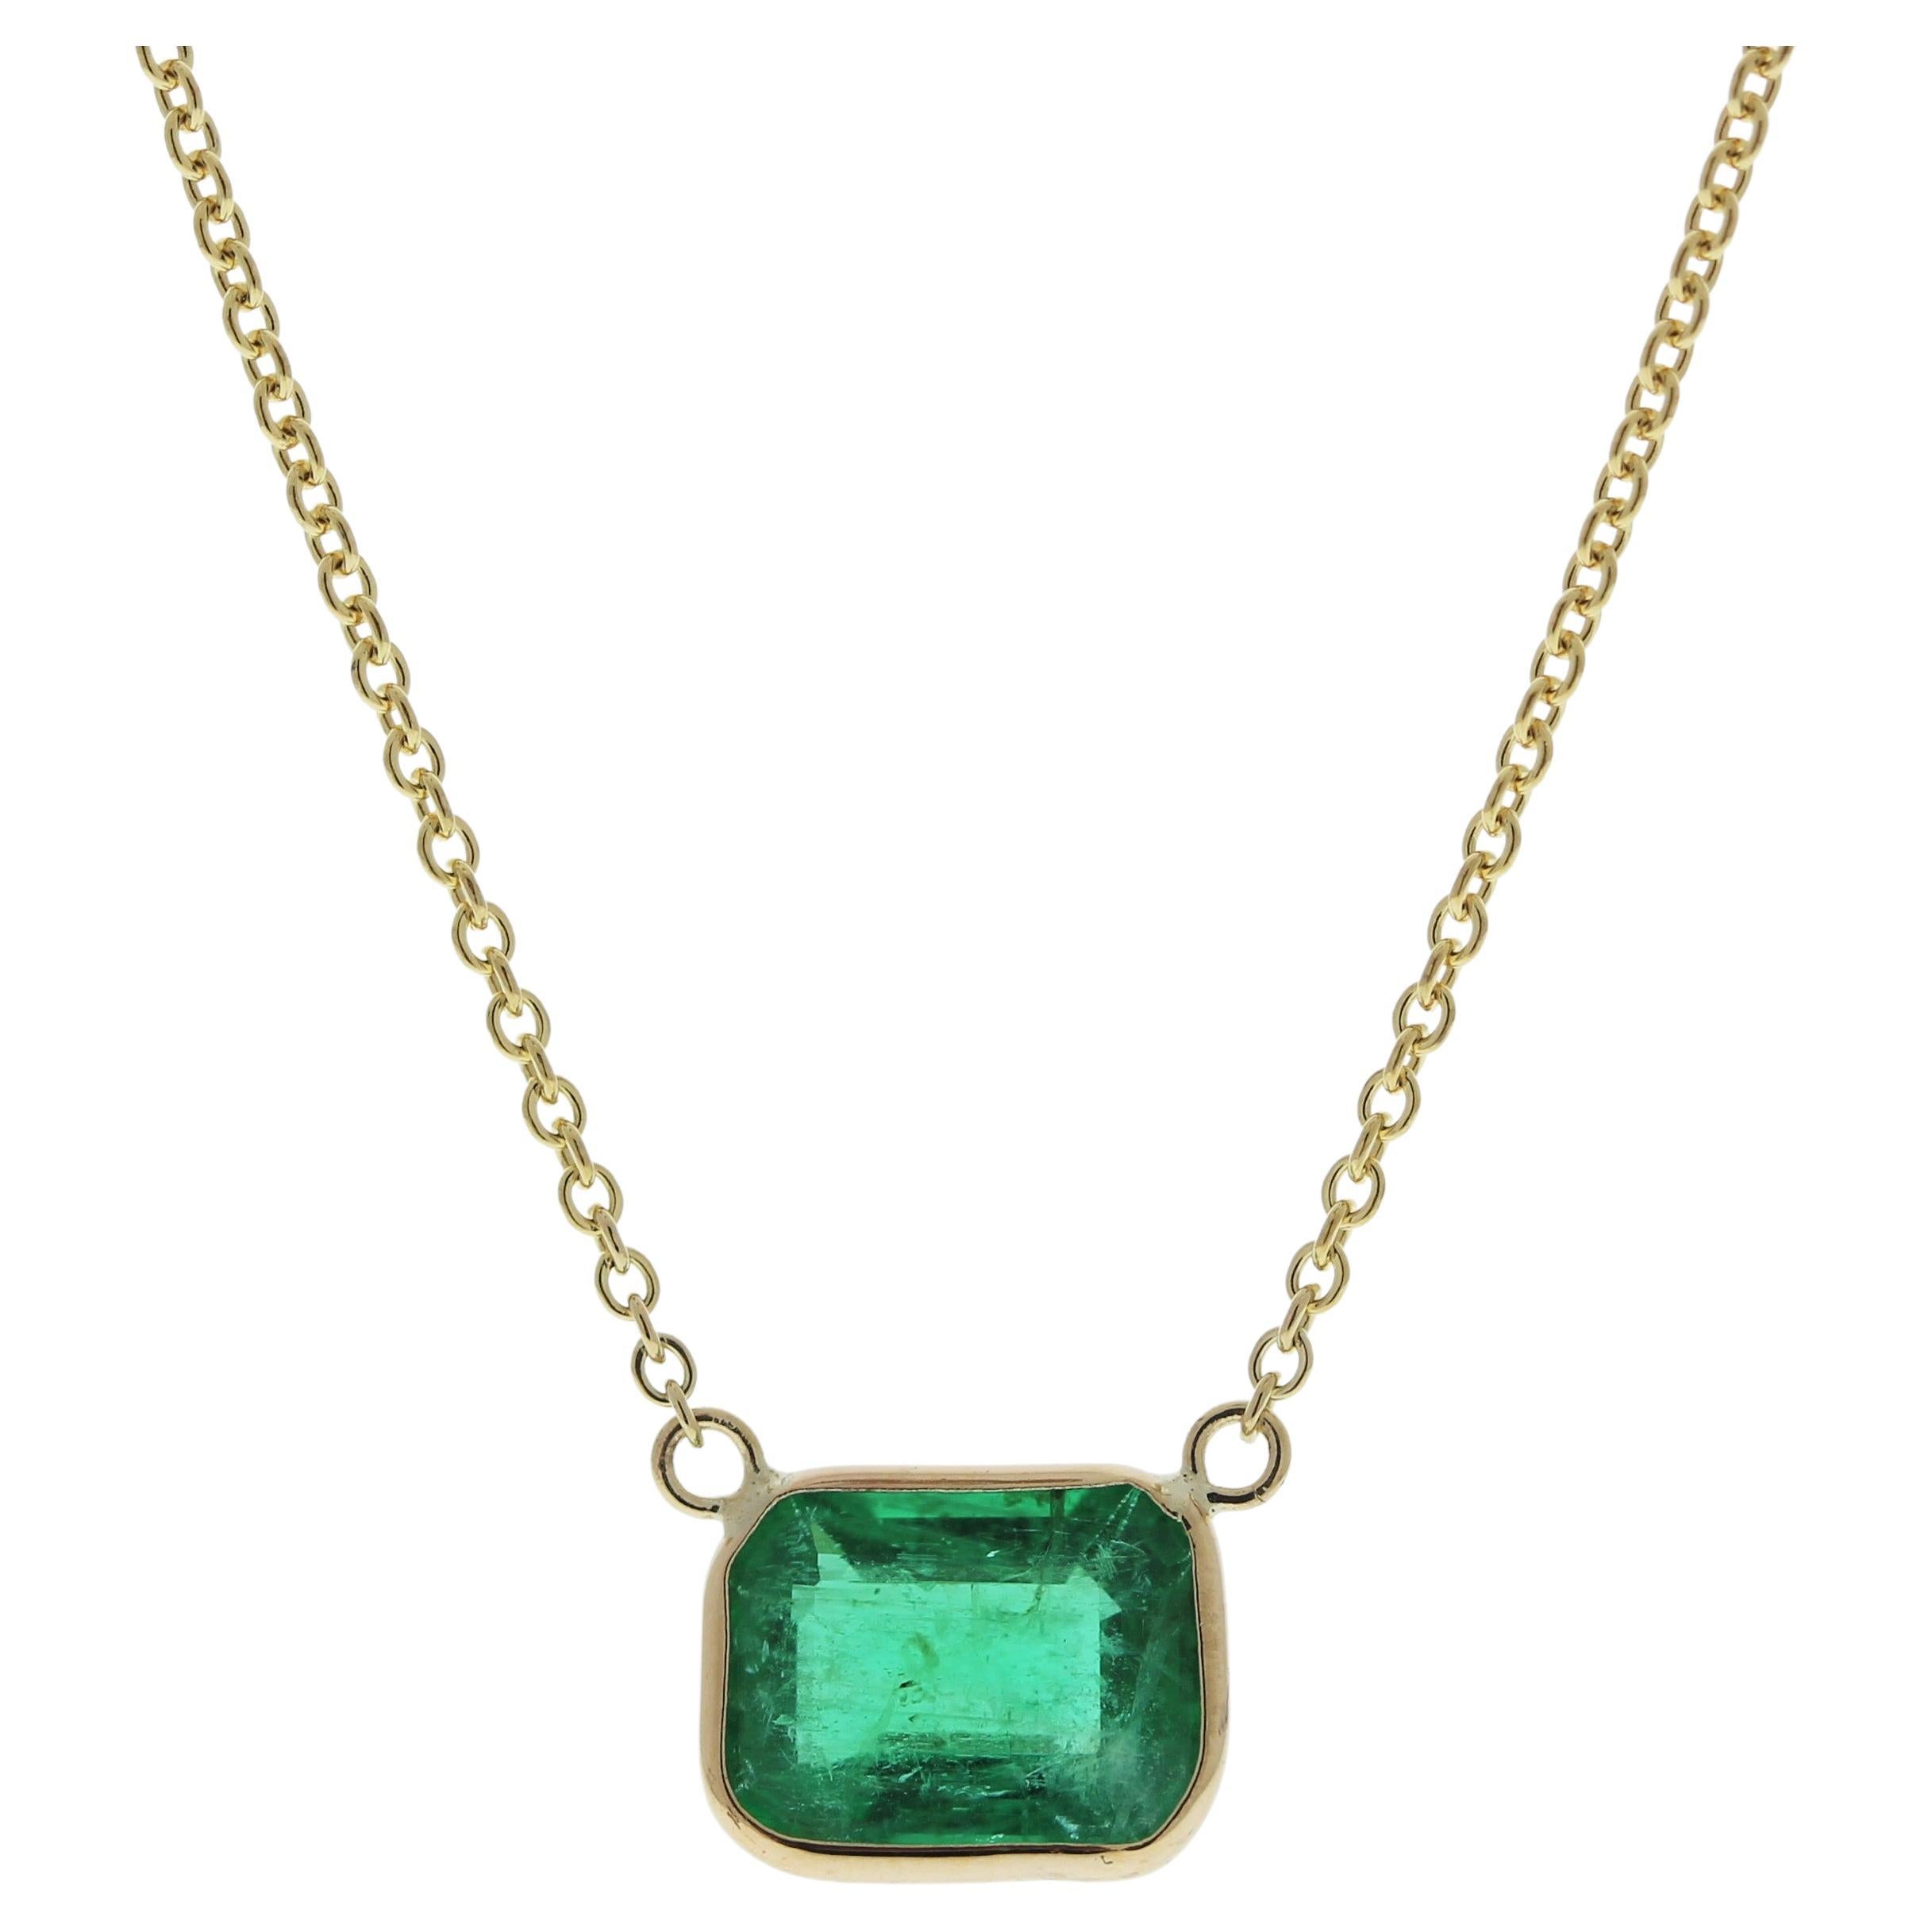 1.80 Carat Emerald Green Fashion Necklaces In 14k Yellow Gold For Sale